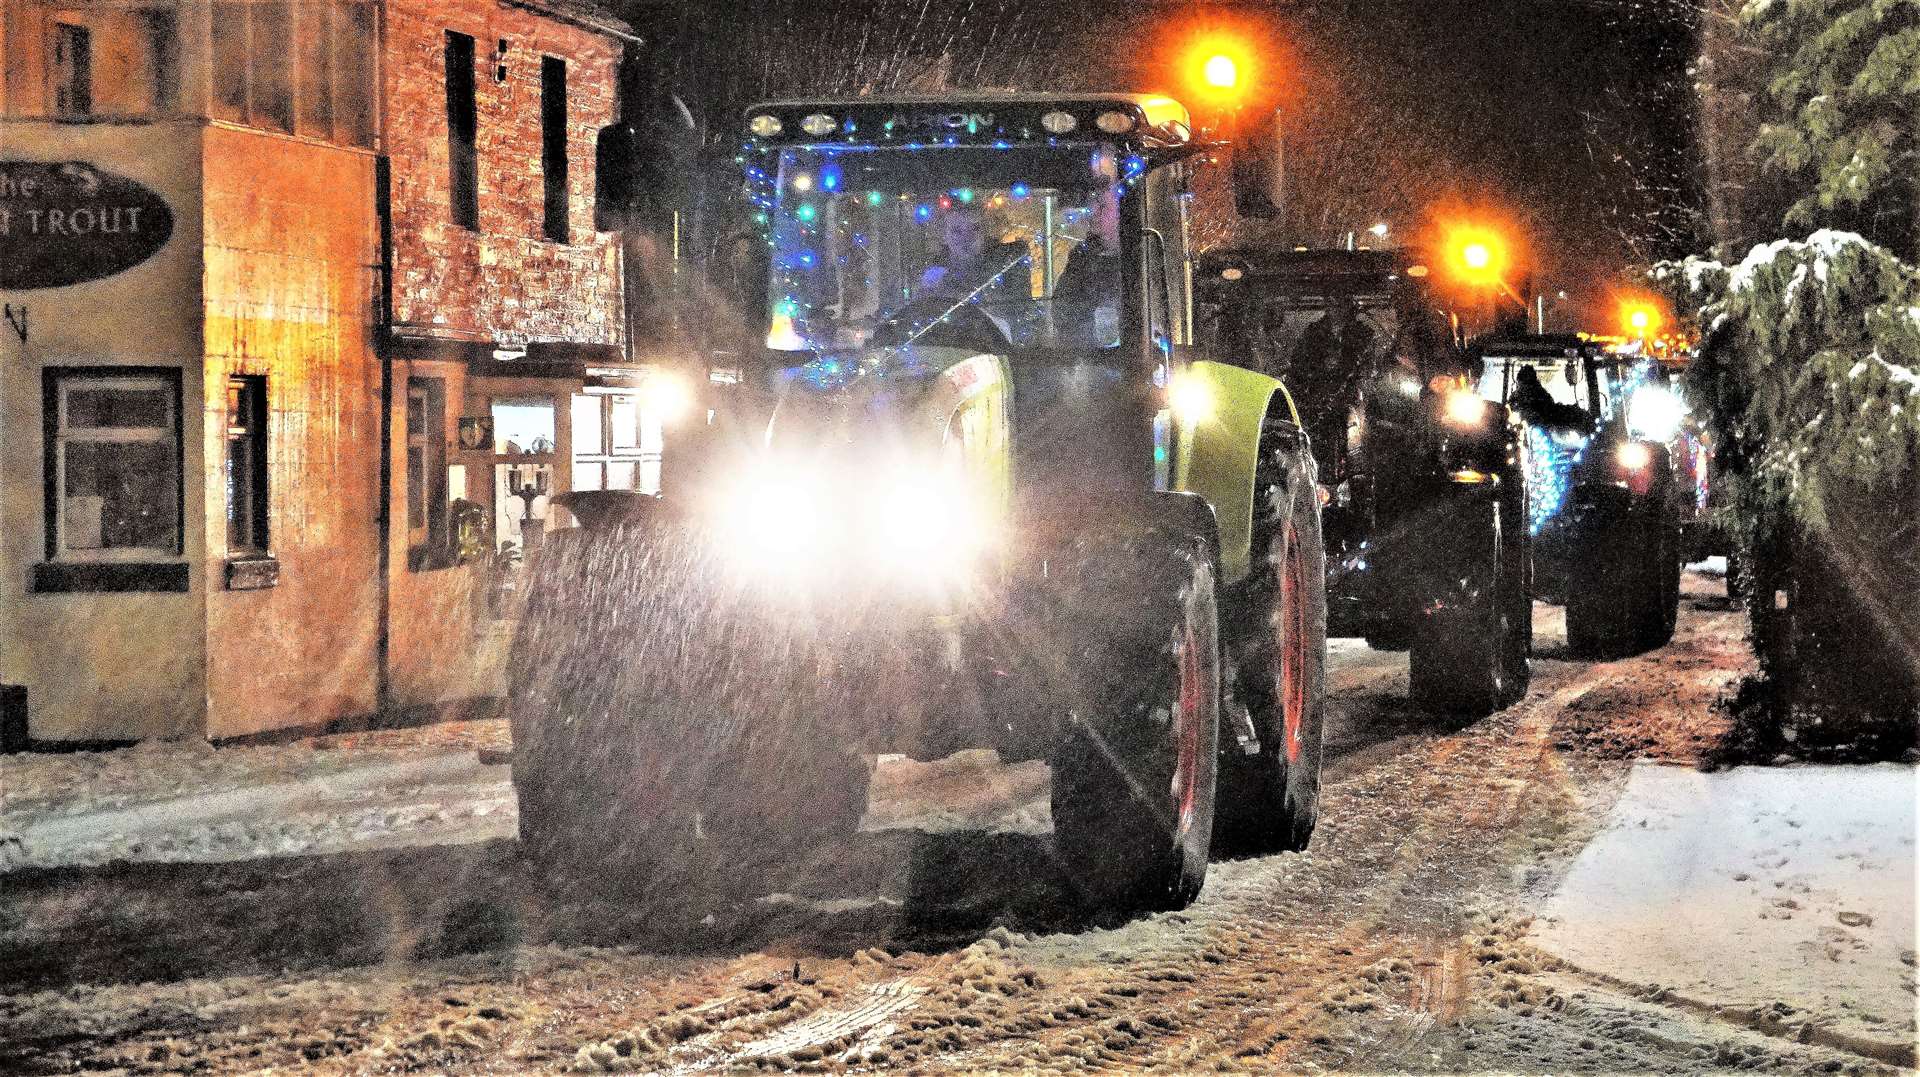 Snow and ice slowed the convoy down a bit but they made Thurso by around 7pm. Picture: DGS